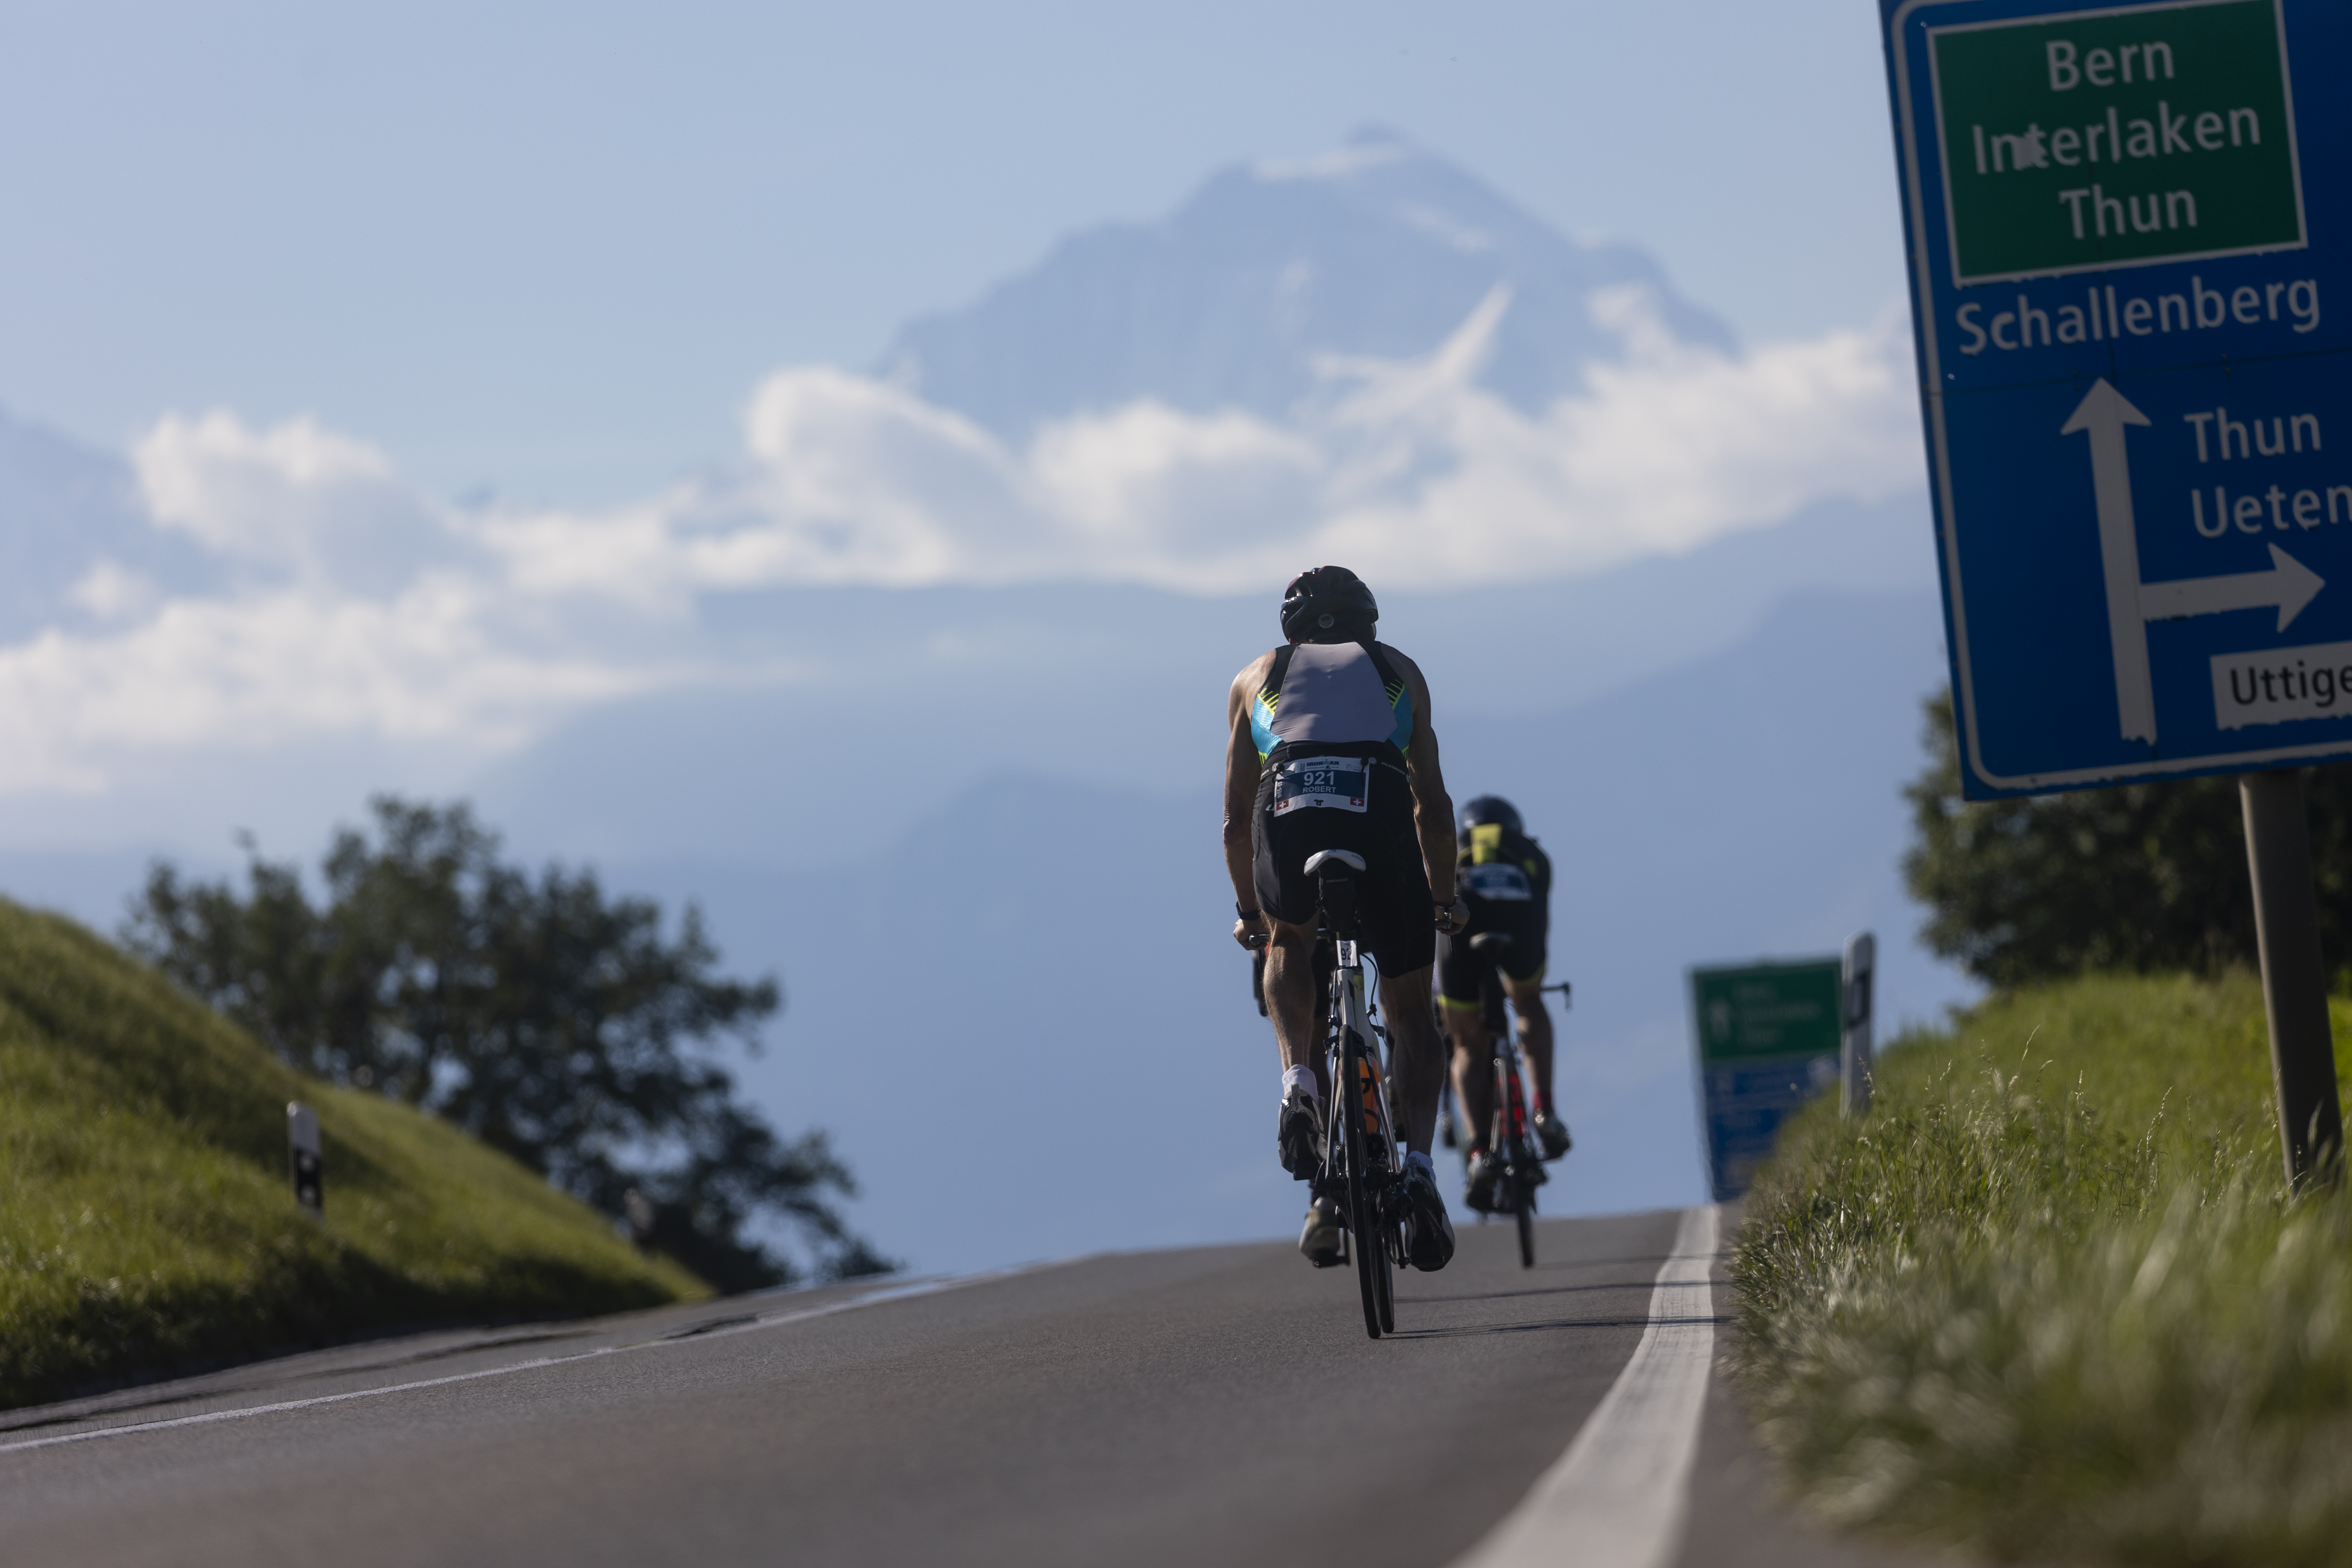 A man biking on a road in Switzerland with a mountain and clouds in the background